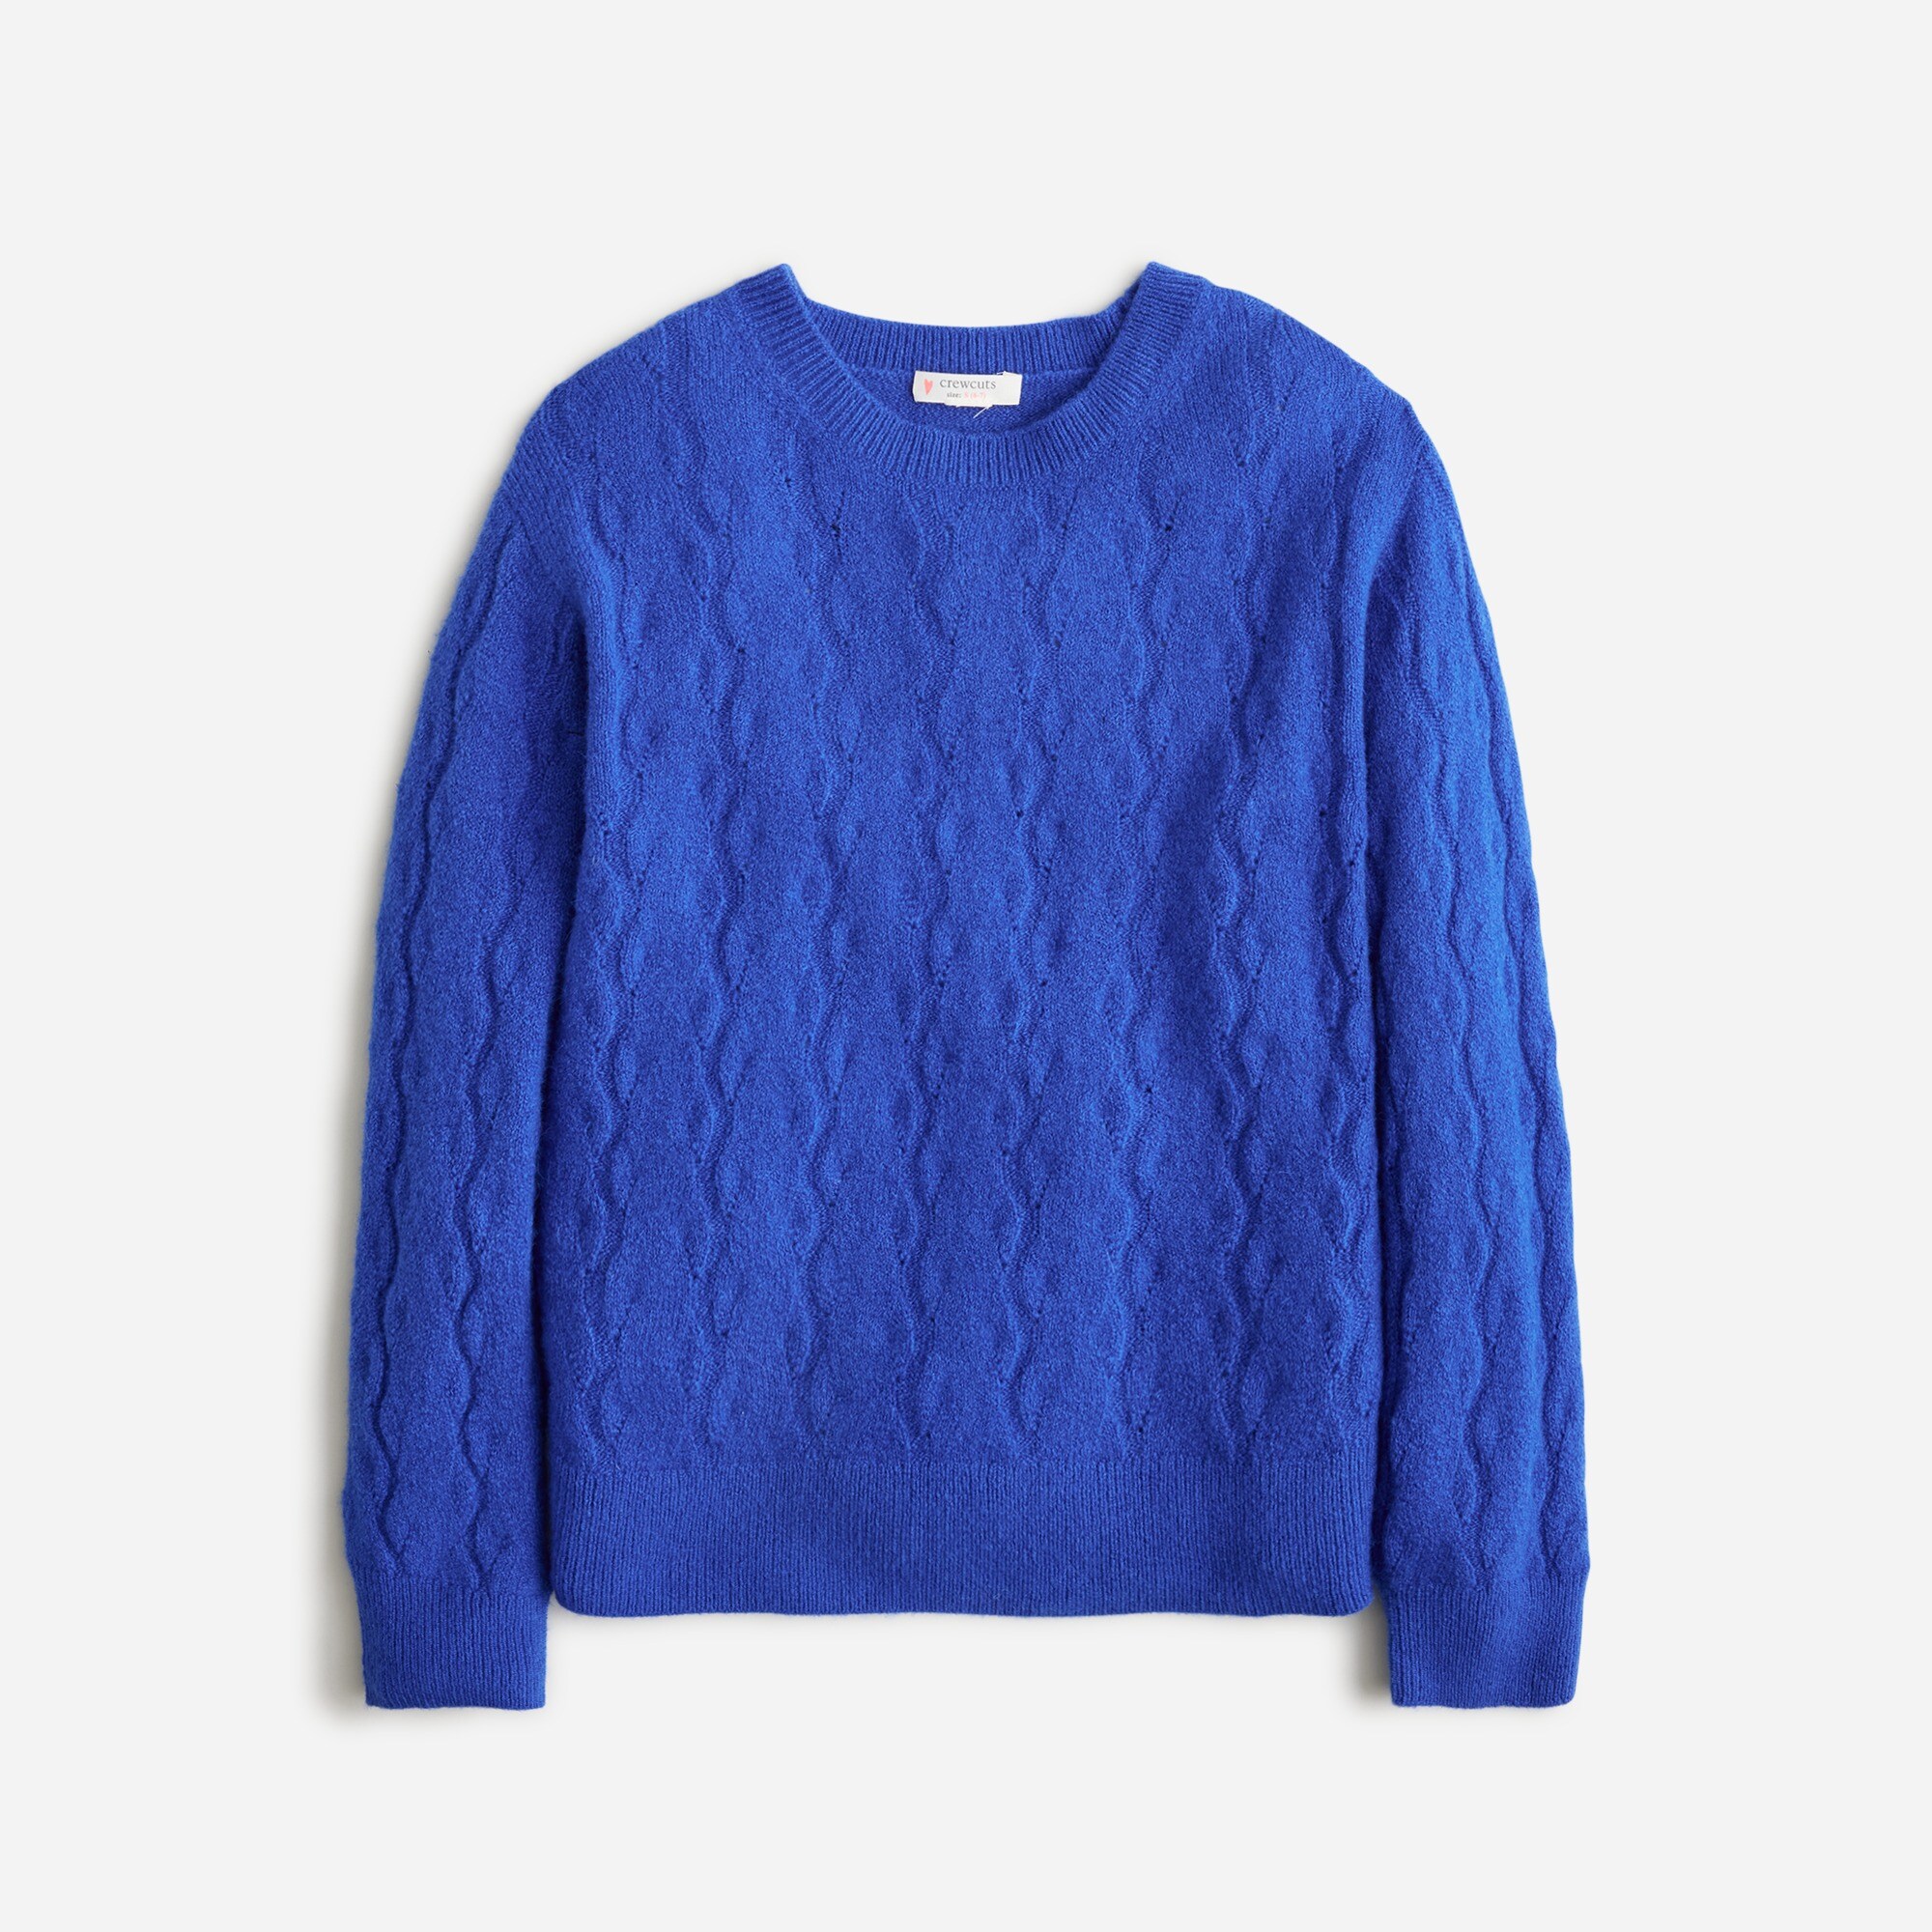  Girls' supersoft cable-knit sweater